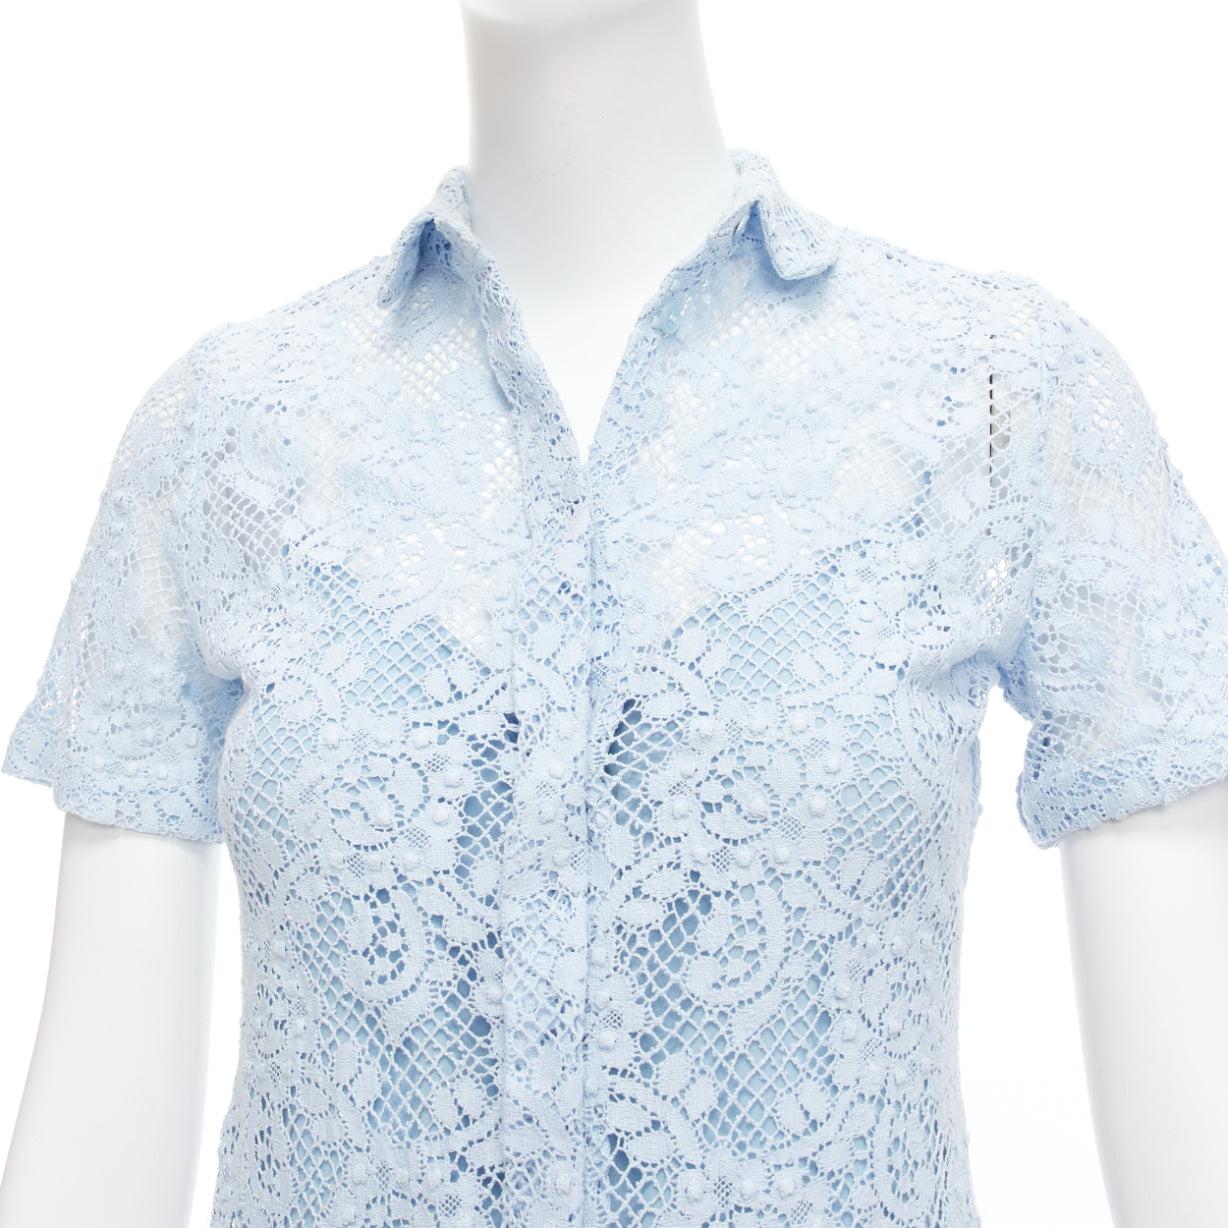 BURBERRY 2014 Runway baby blue floral lace short sleeve dress shirt IT36 XXS
Reference: AAWC/A01132
Brand: Burberry
Designer: Christopher Bailey
Collection: Spring Summer 2014 - Runway
Material: Cotton
Color: Blue
Pattern: Lace
Closure: